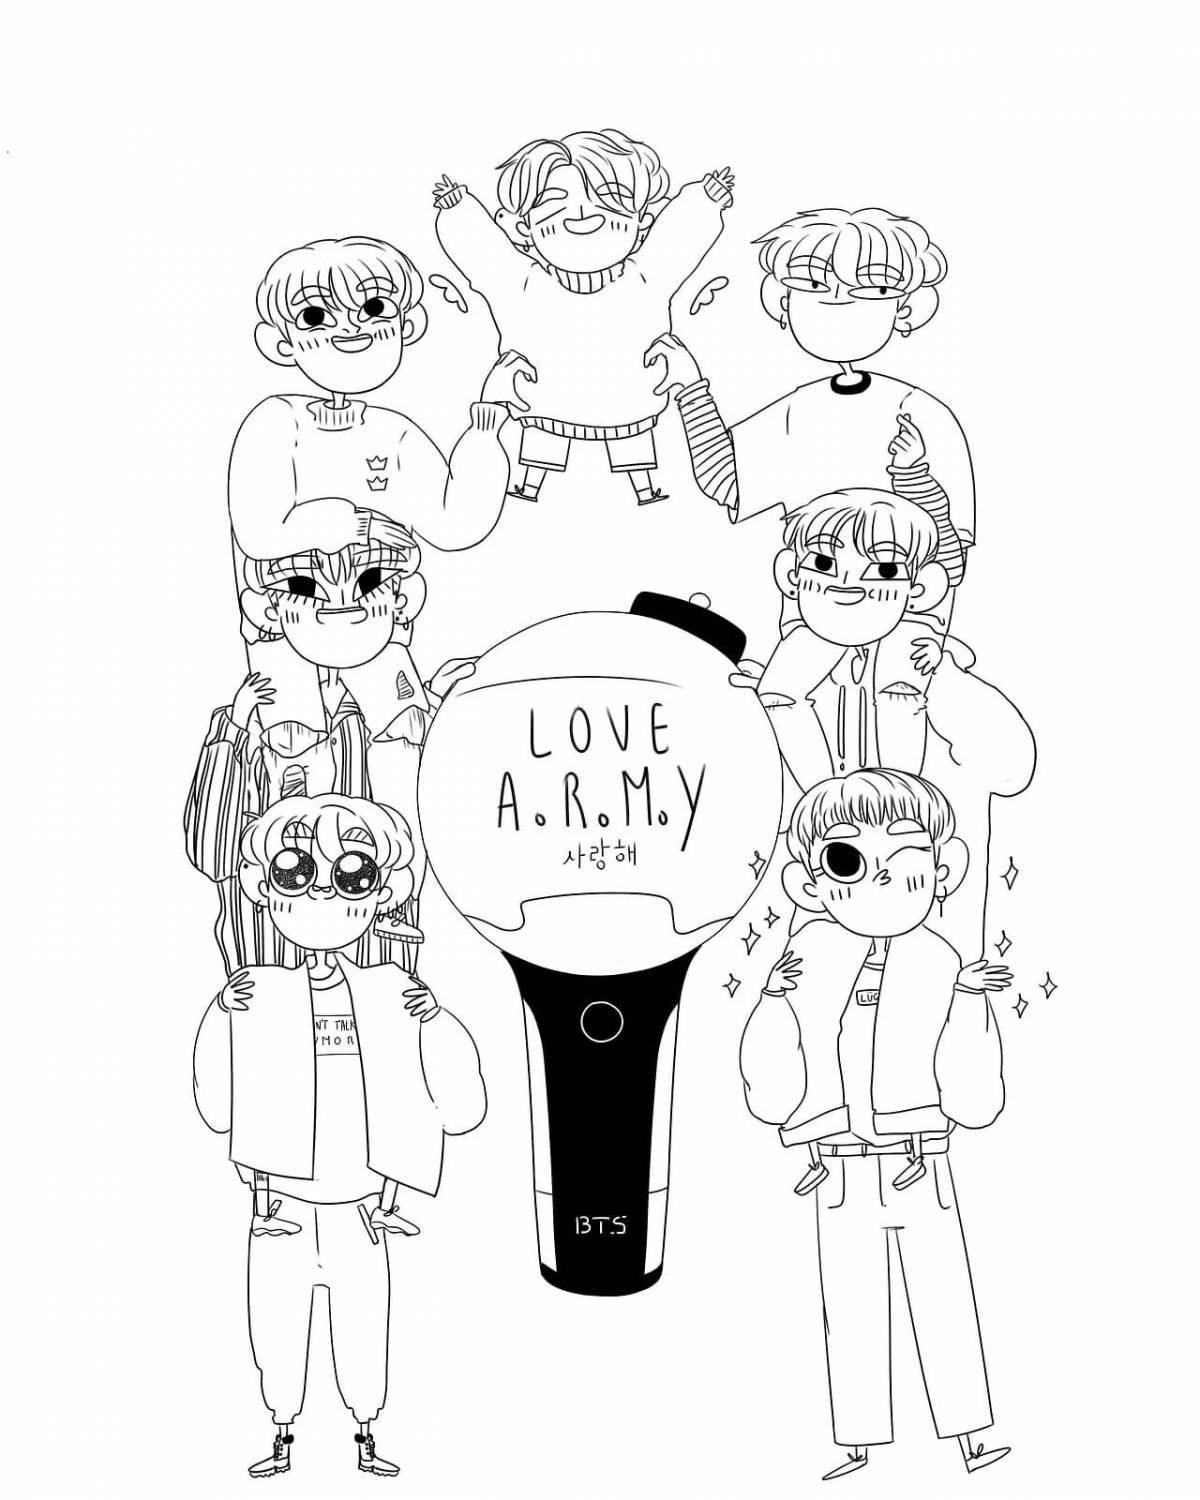 Exciting bts game coloring page